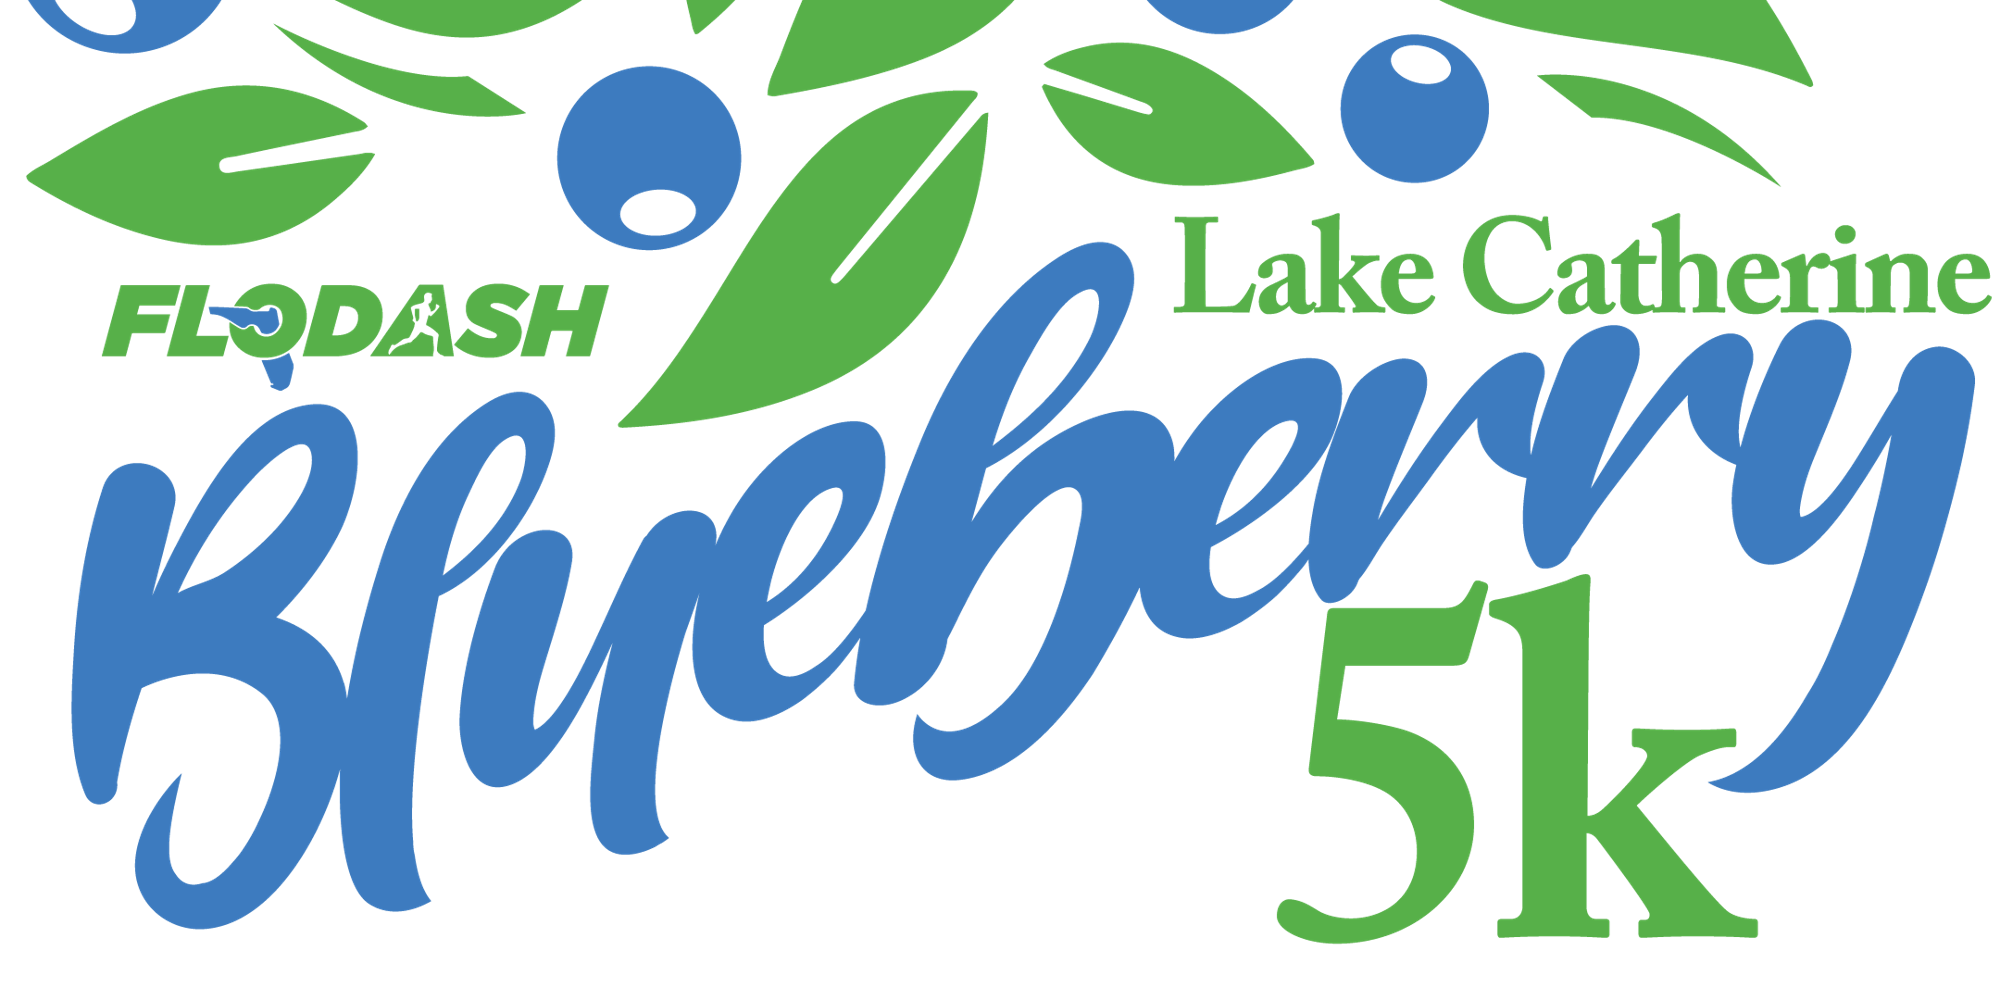 Lake Catherine Blueberry 5k and Healthy Living Festival promotional image